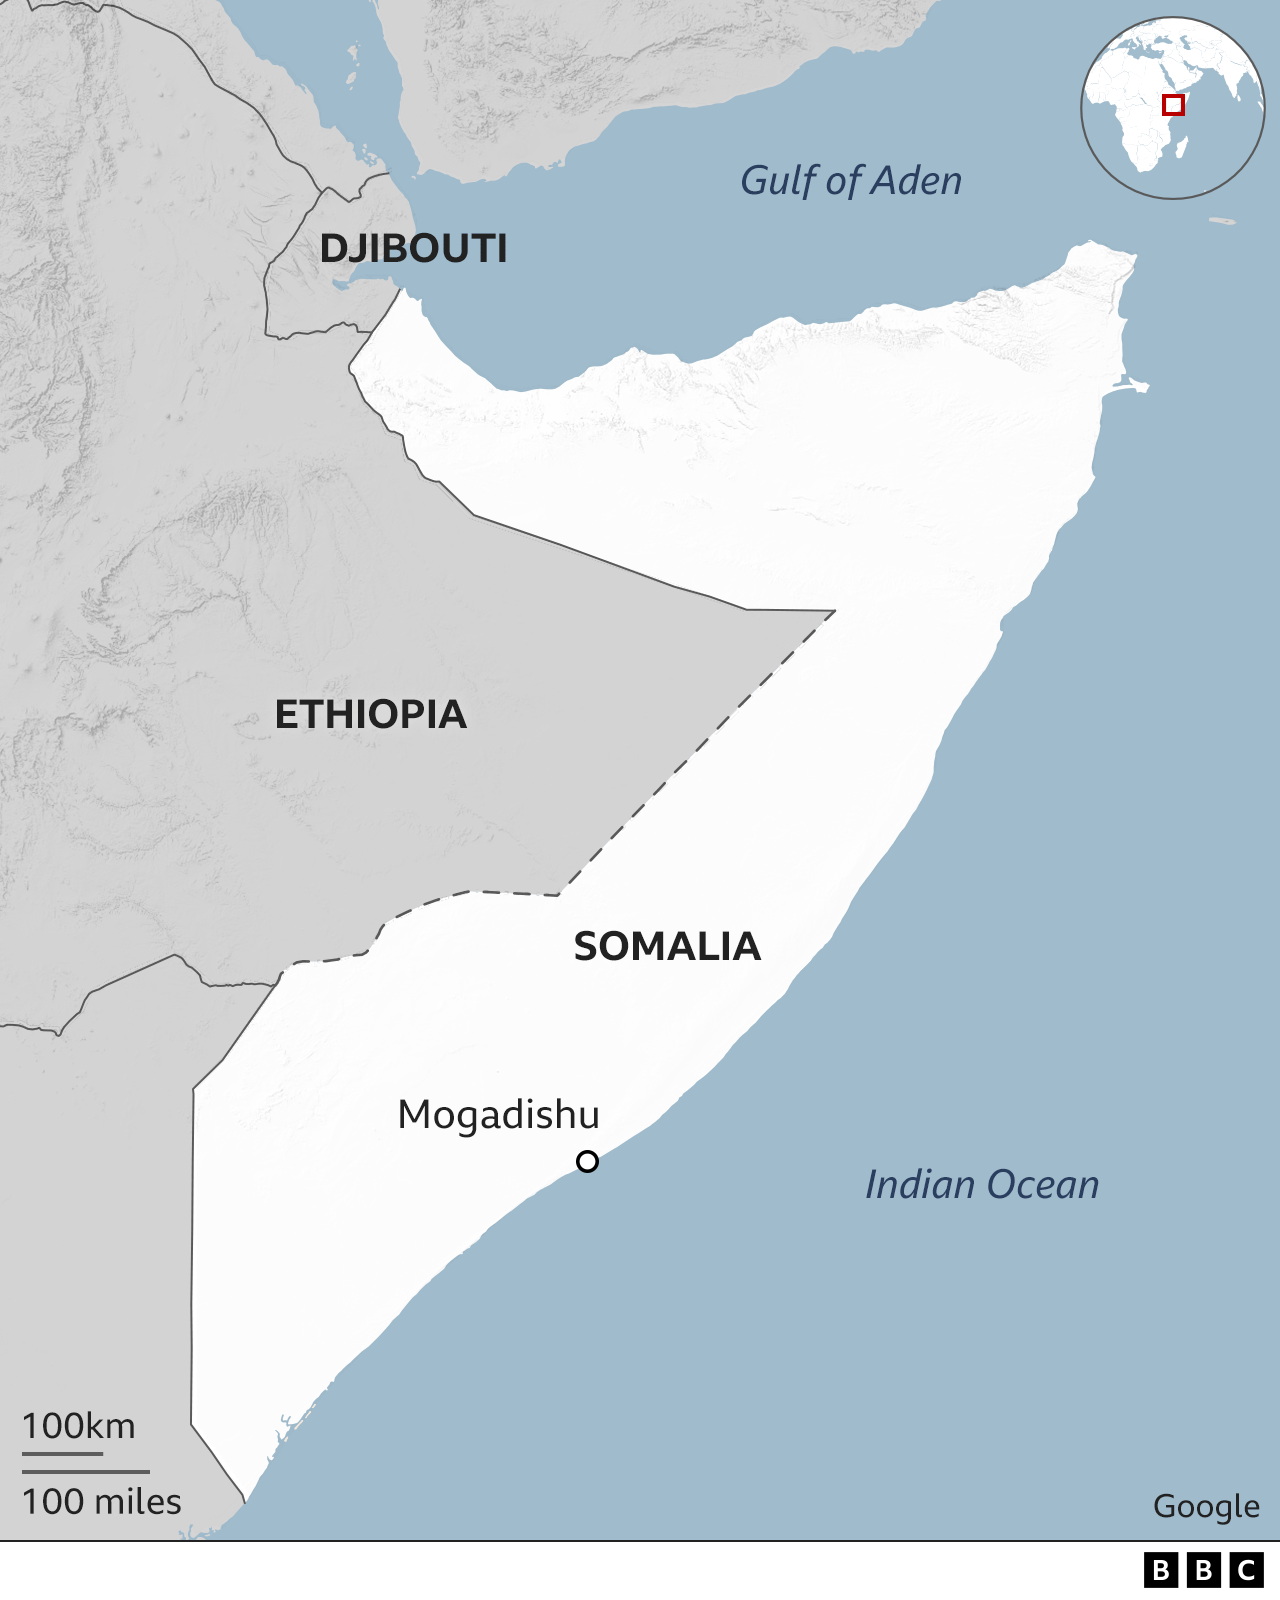 Map showing location of Somalia in relation to Ethiopia, Djibouti and the Indian Ocean